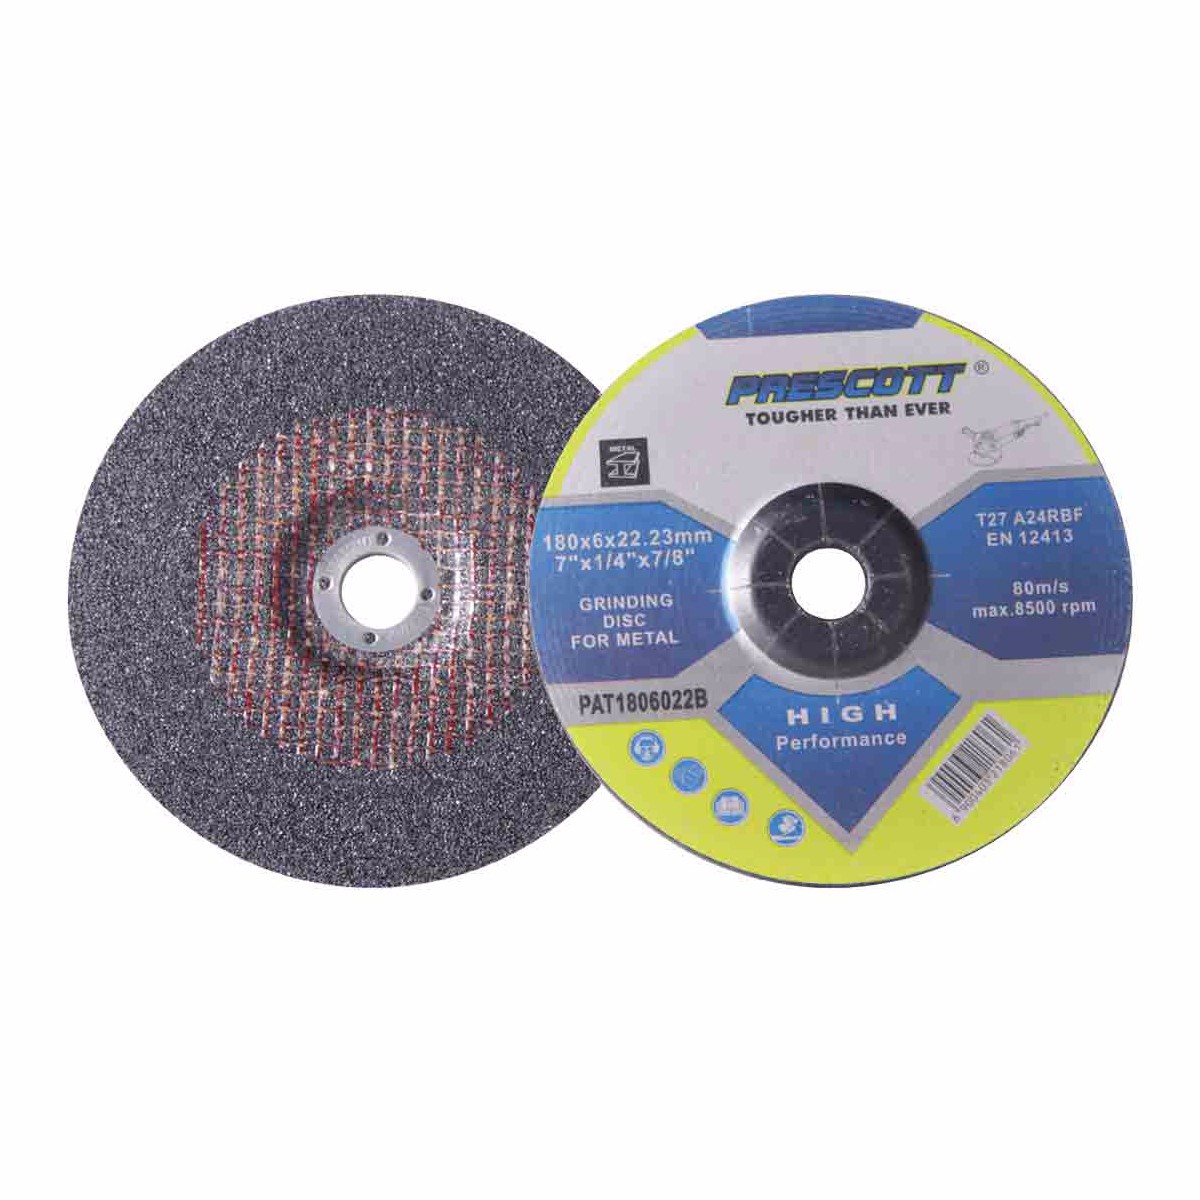 GRINDING DISC FOR METAL